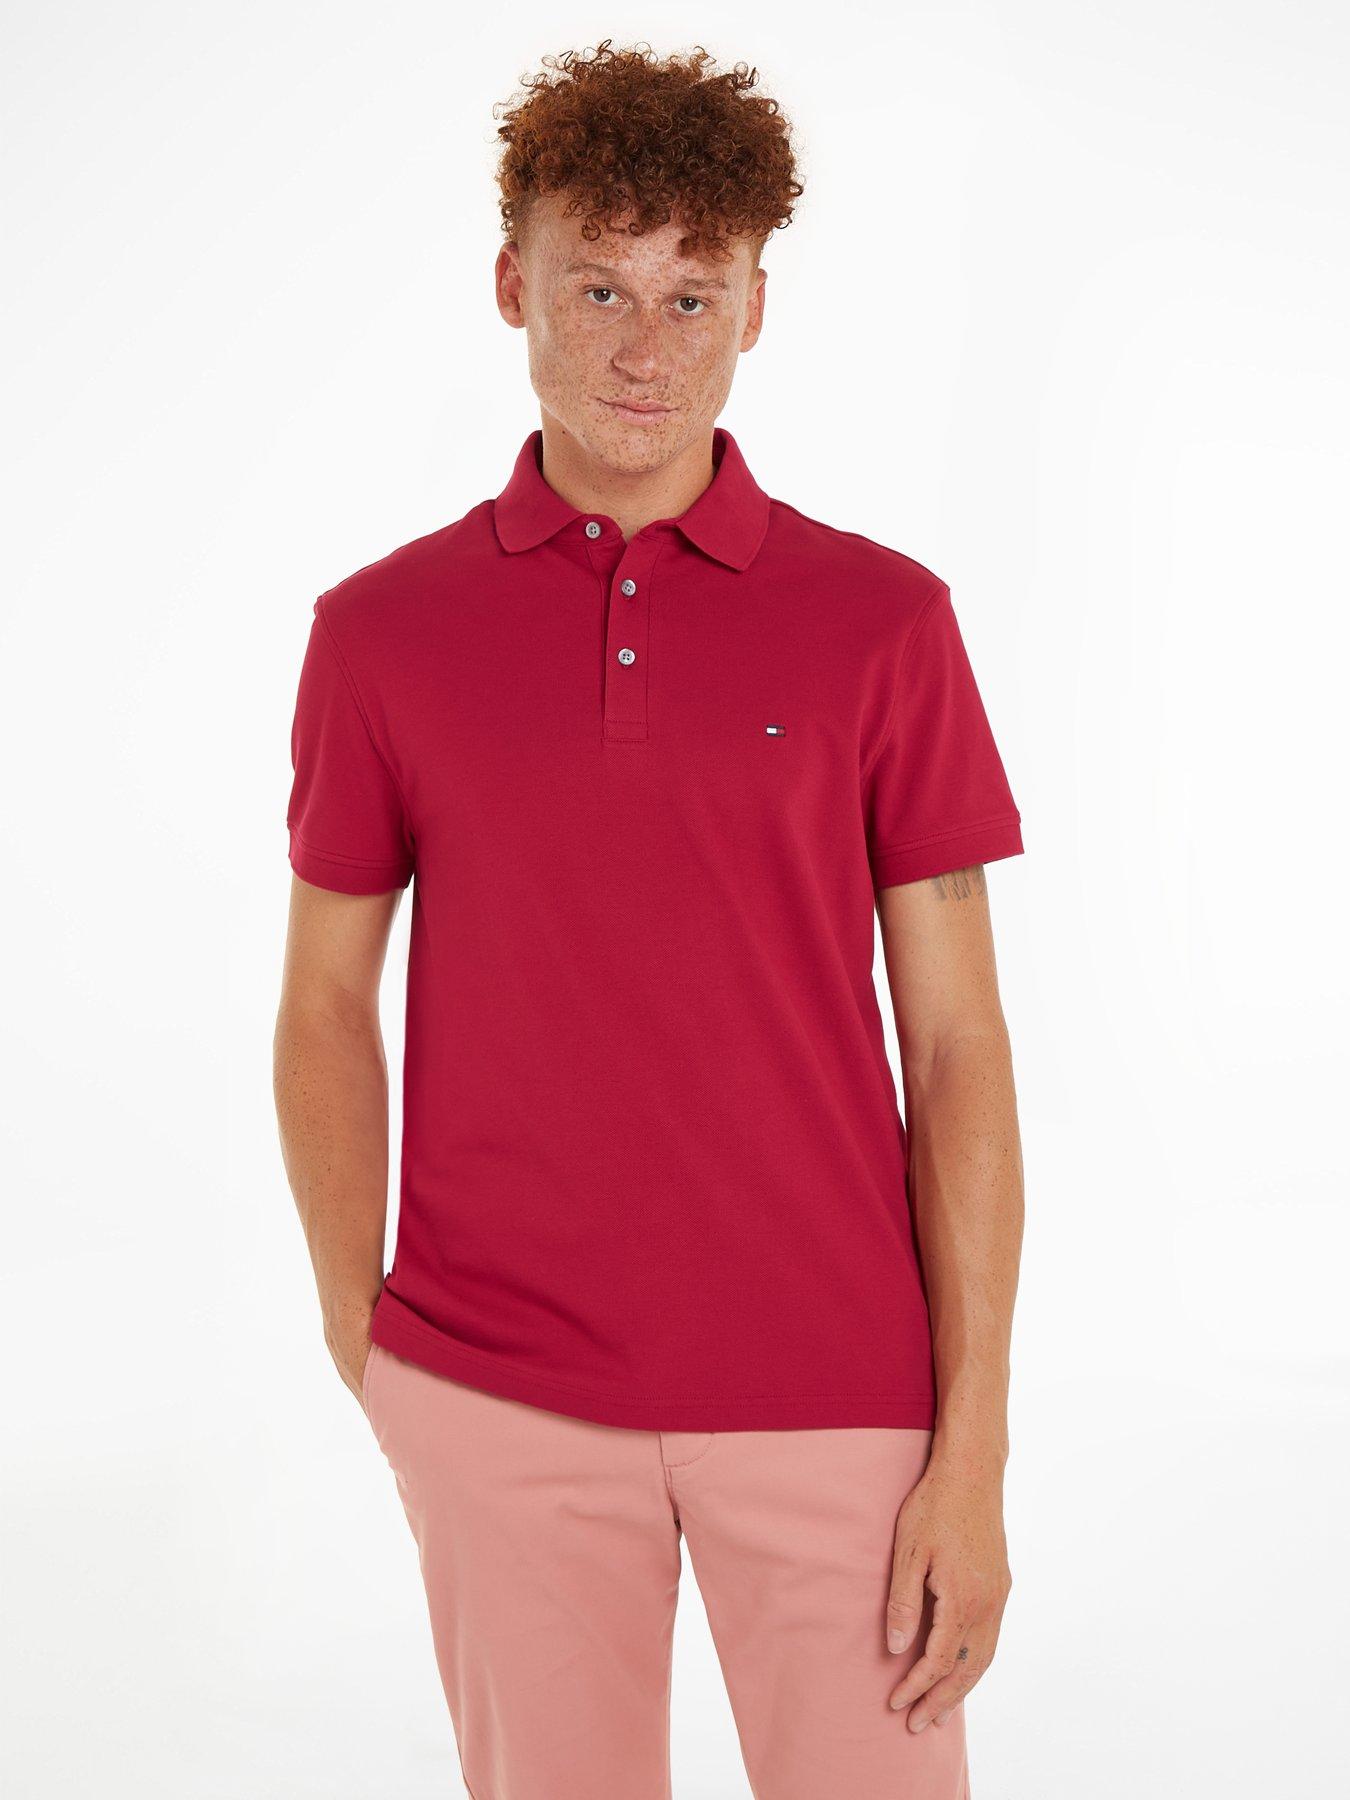 Tommy Hilfiger Boys Red, White & Navy Logo Polo Shirt | Junior Couture